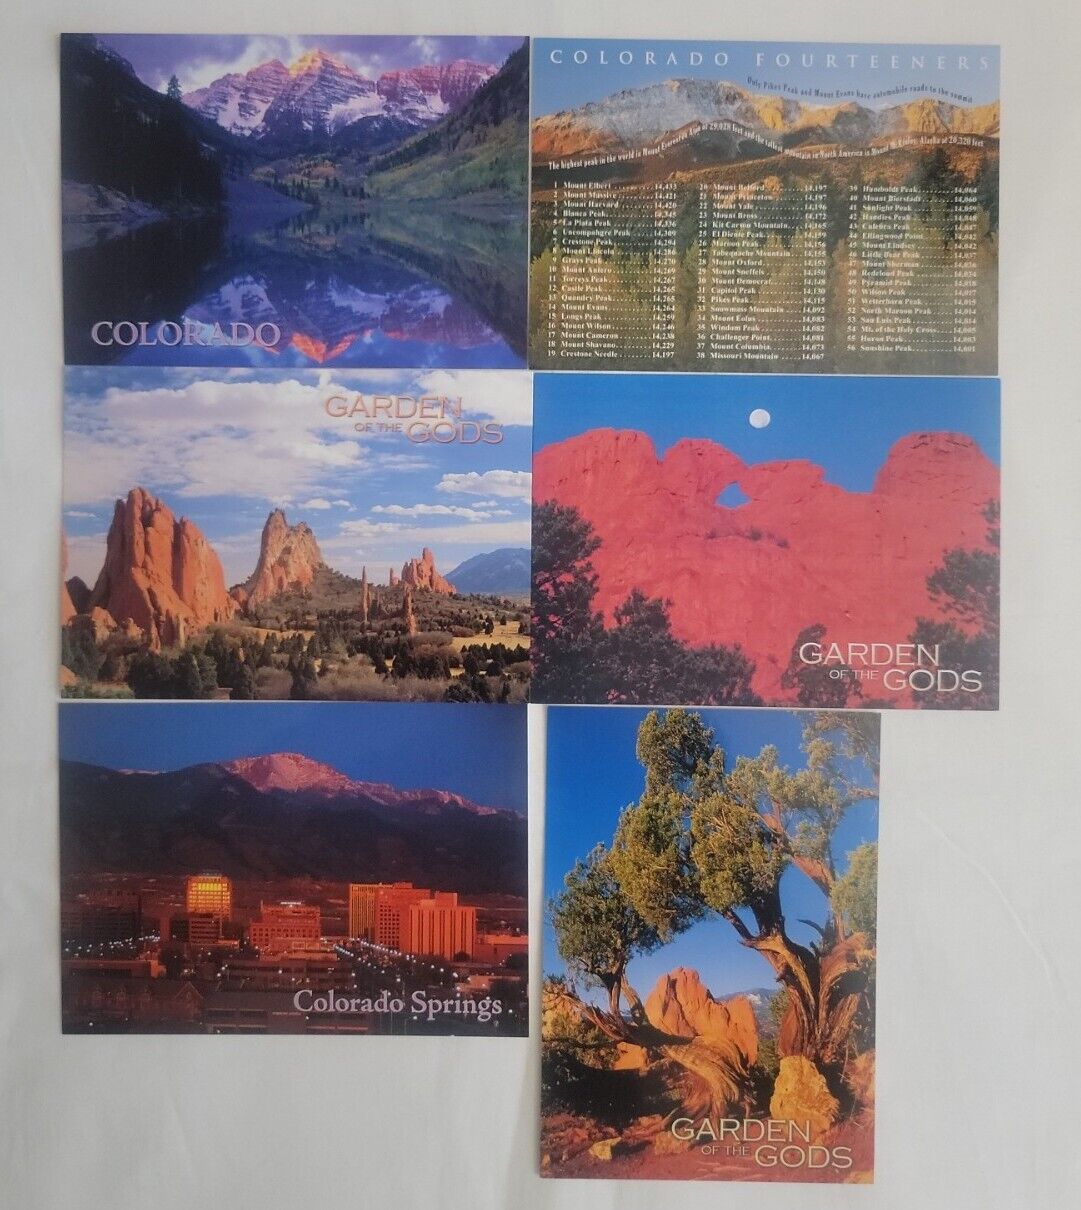 NEW Colorado Postcard Lot of 6 Maroon Bells Mountains Garden of the Gods Springs